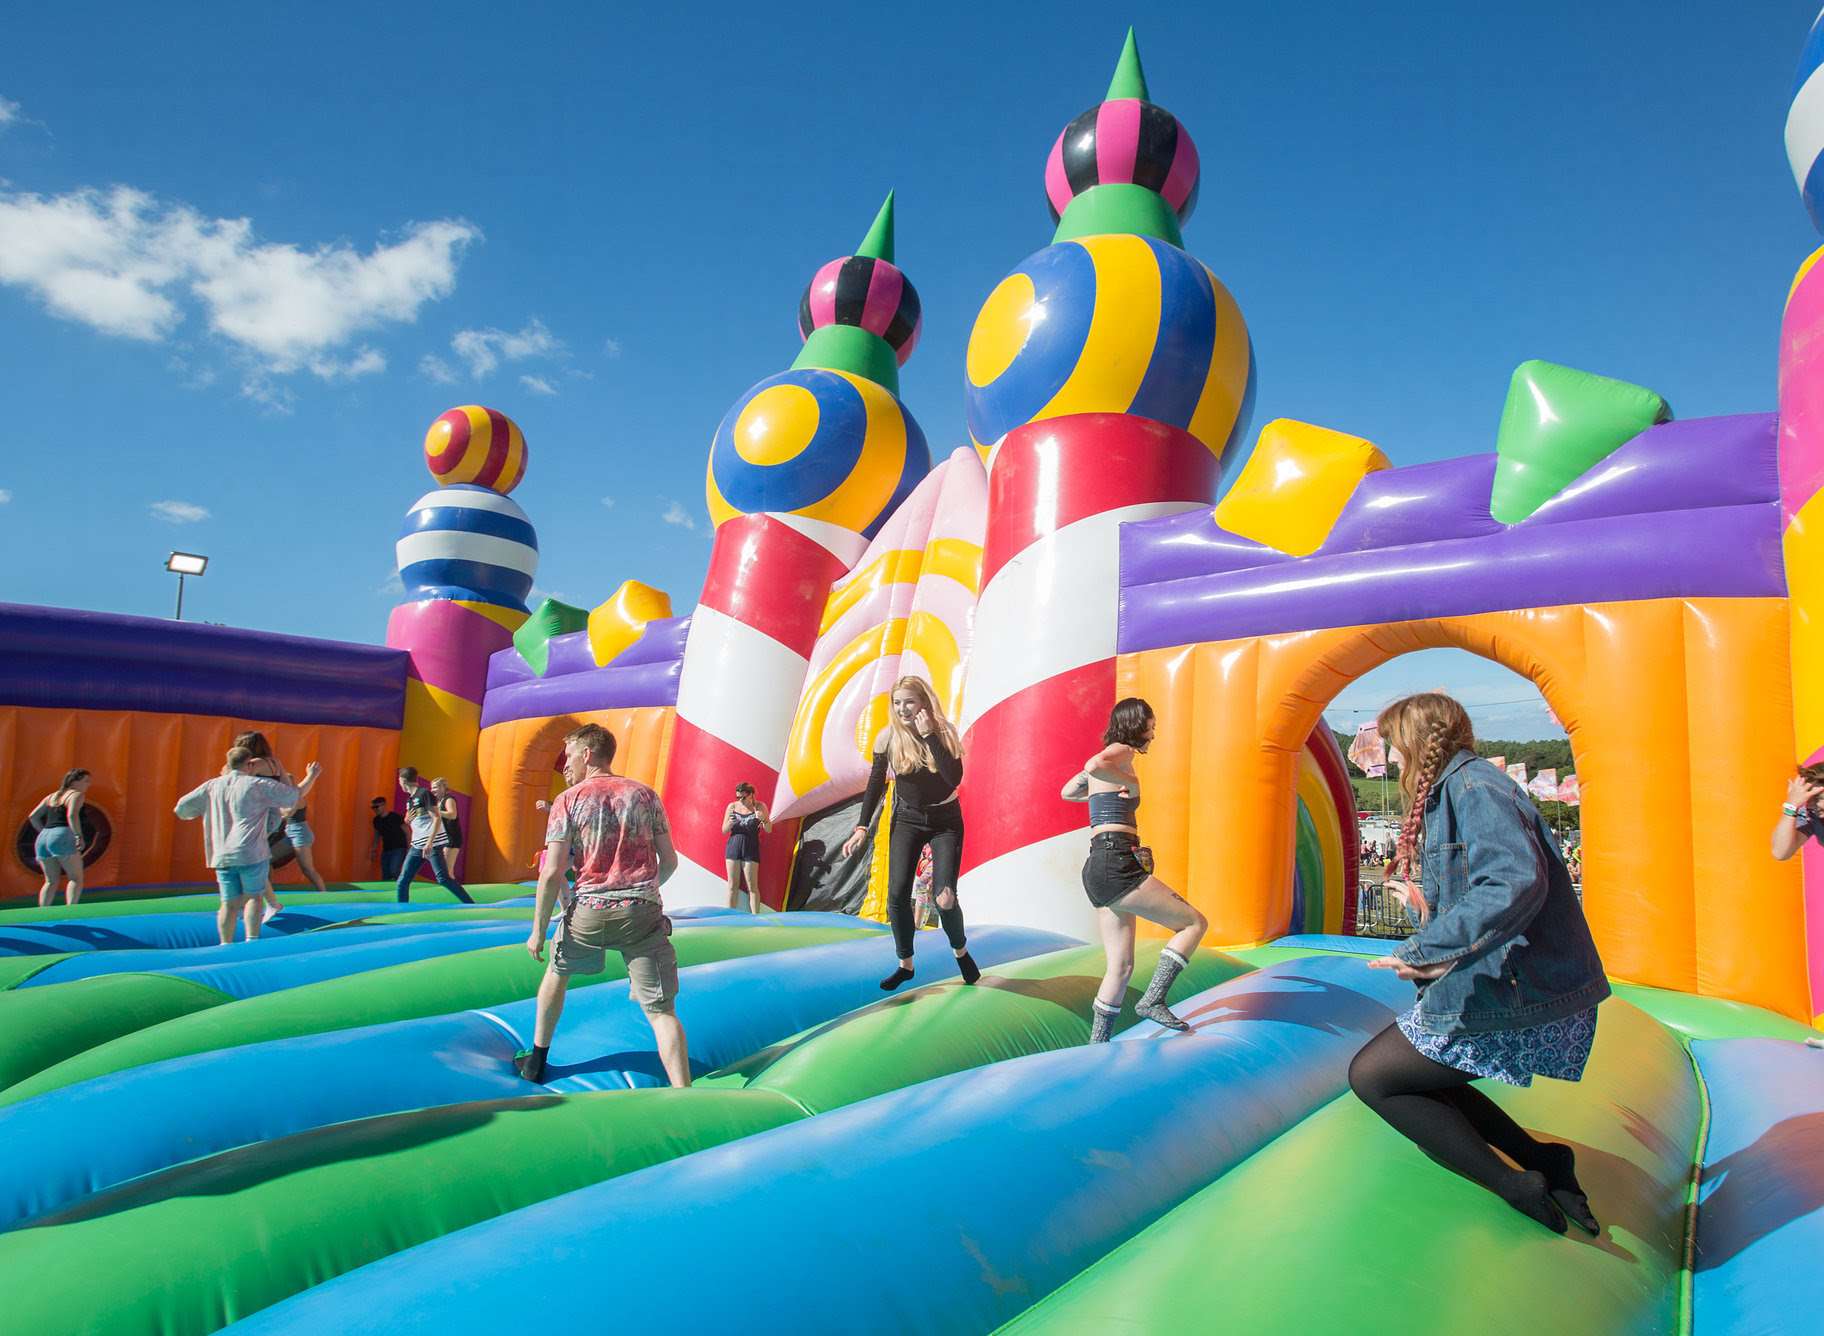 World's biggest bouncy castle is coming to Dreamland